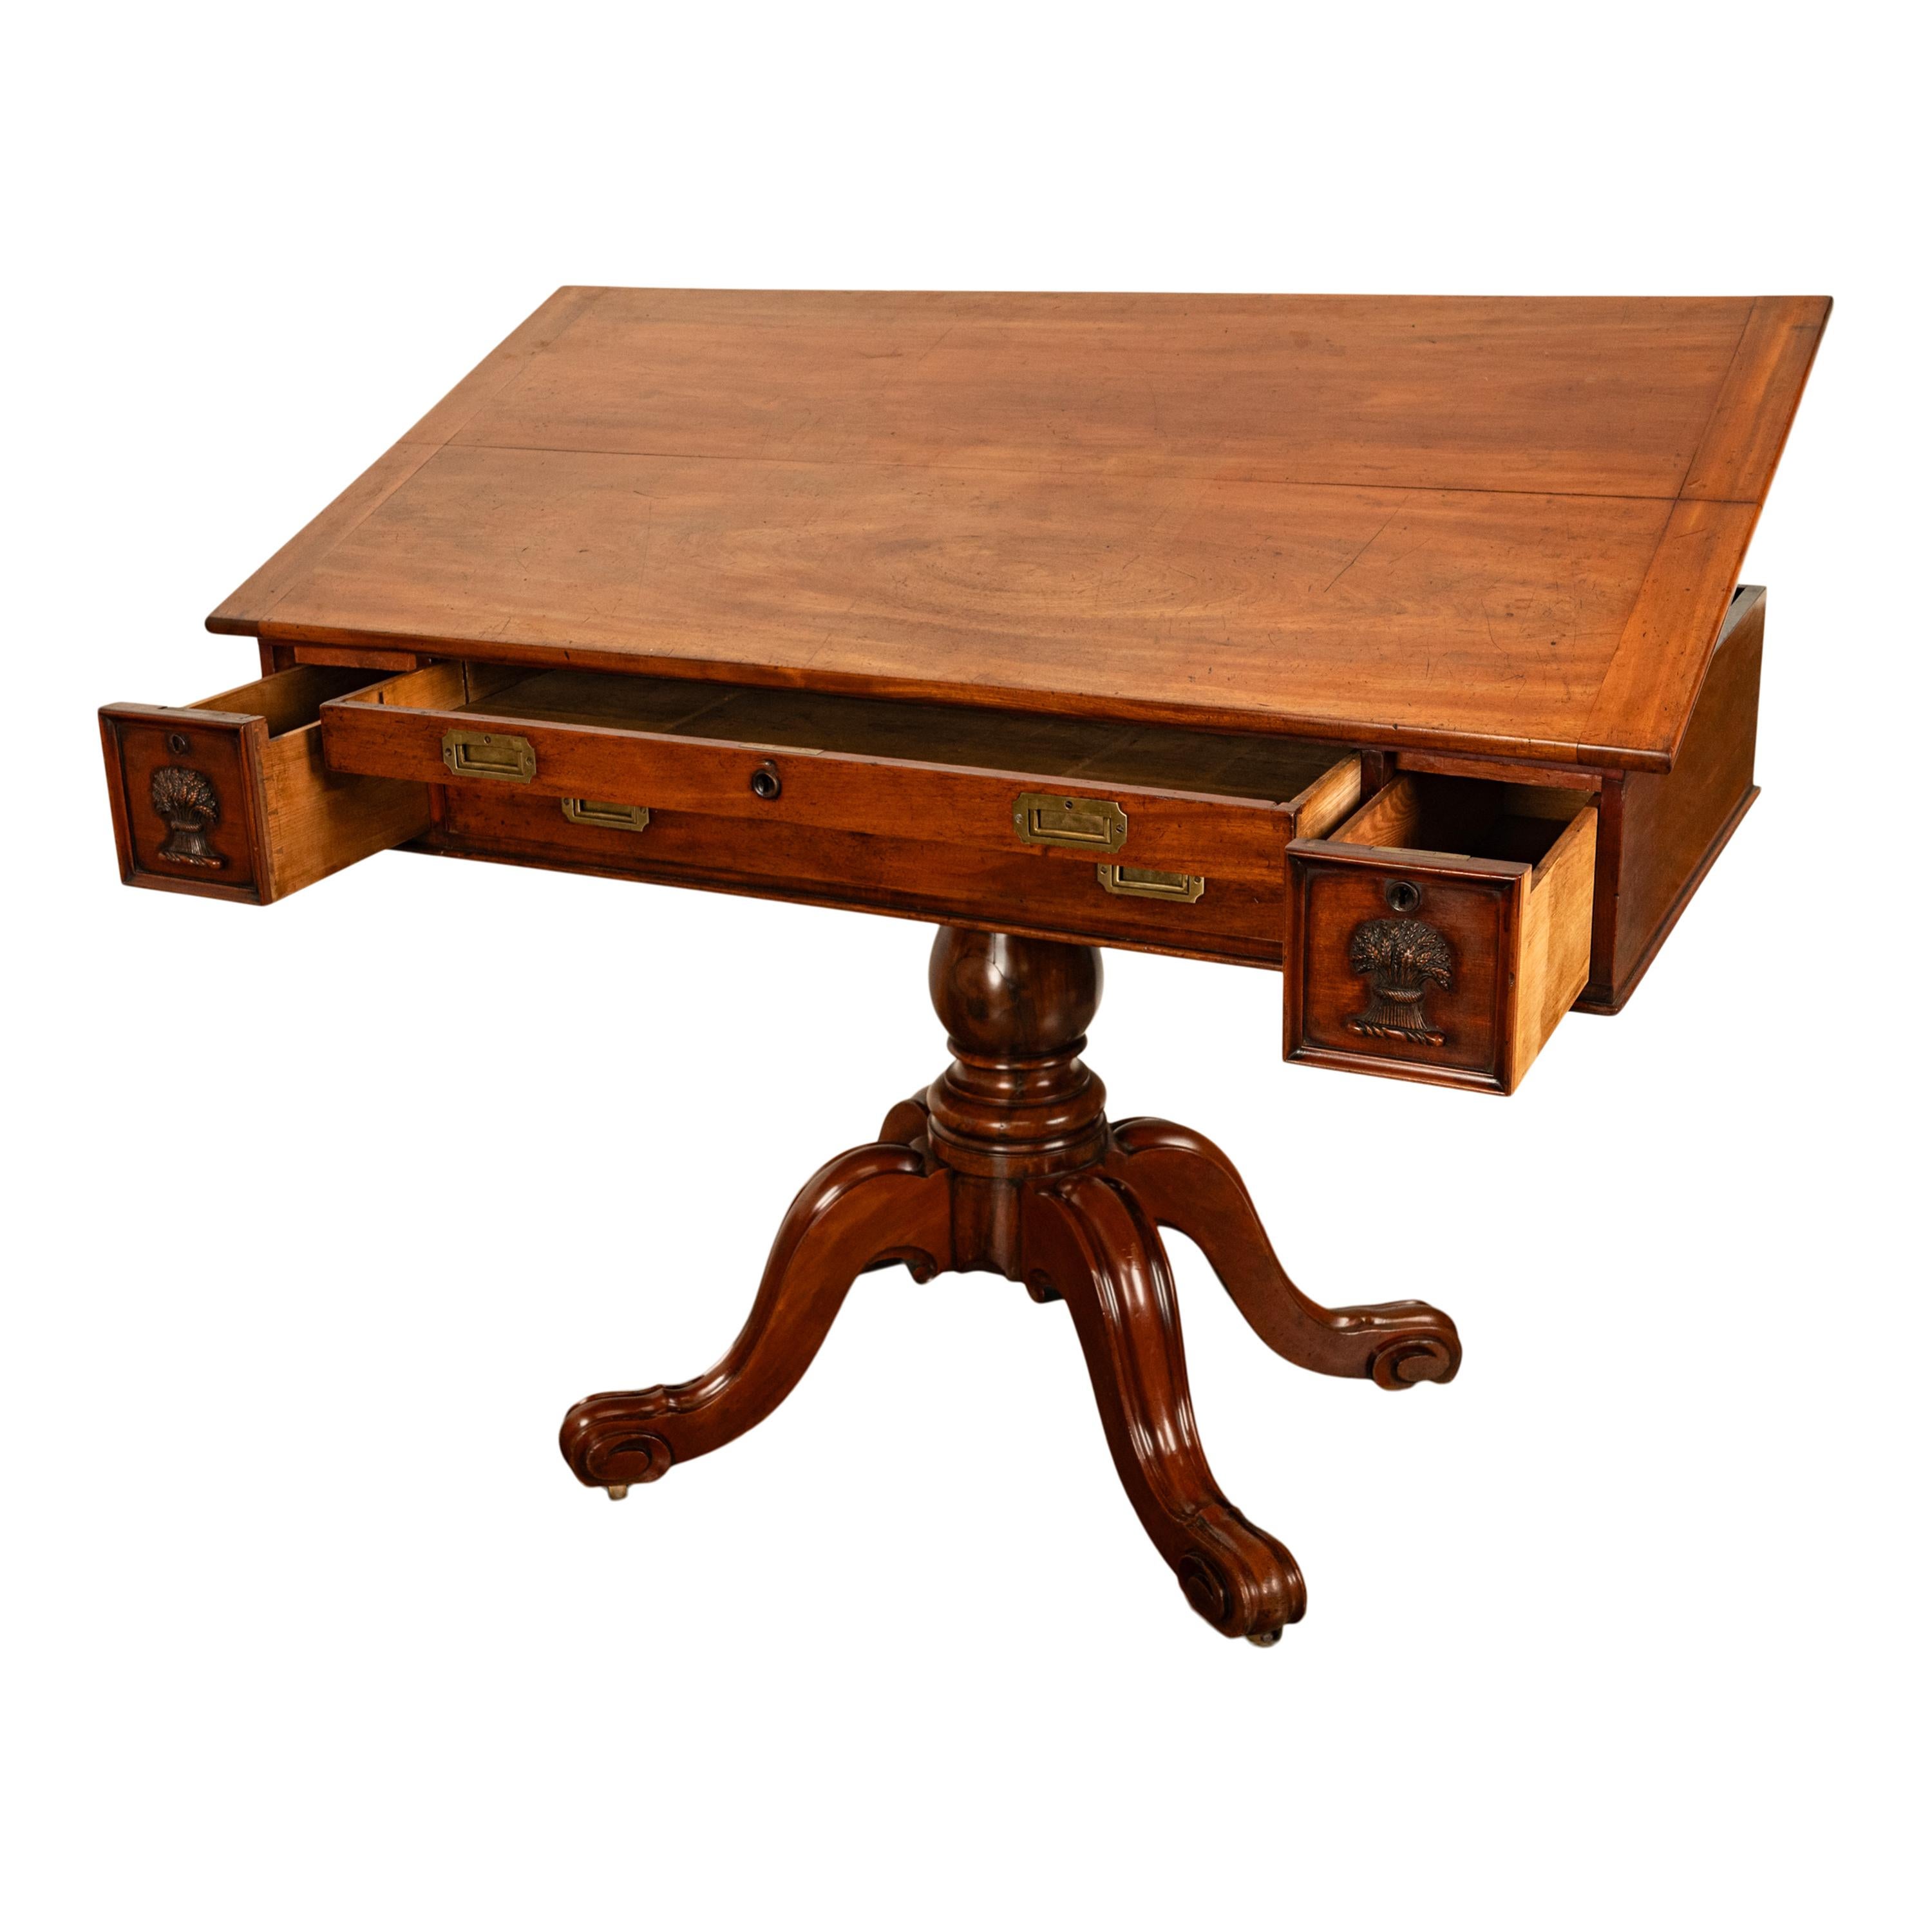 English Antique 19th Century Architect's Mahogany Pedestal Desk Drafting Table 1870 For Sale